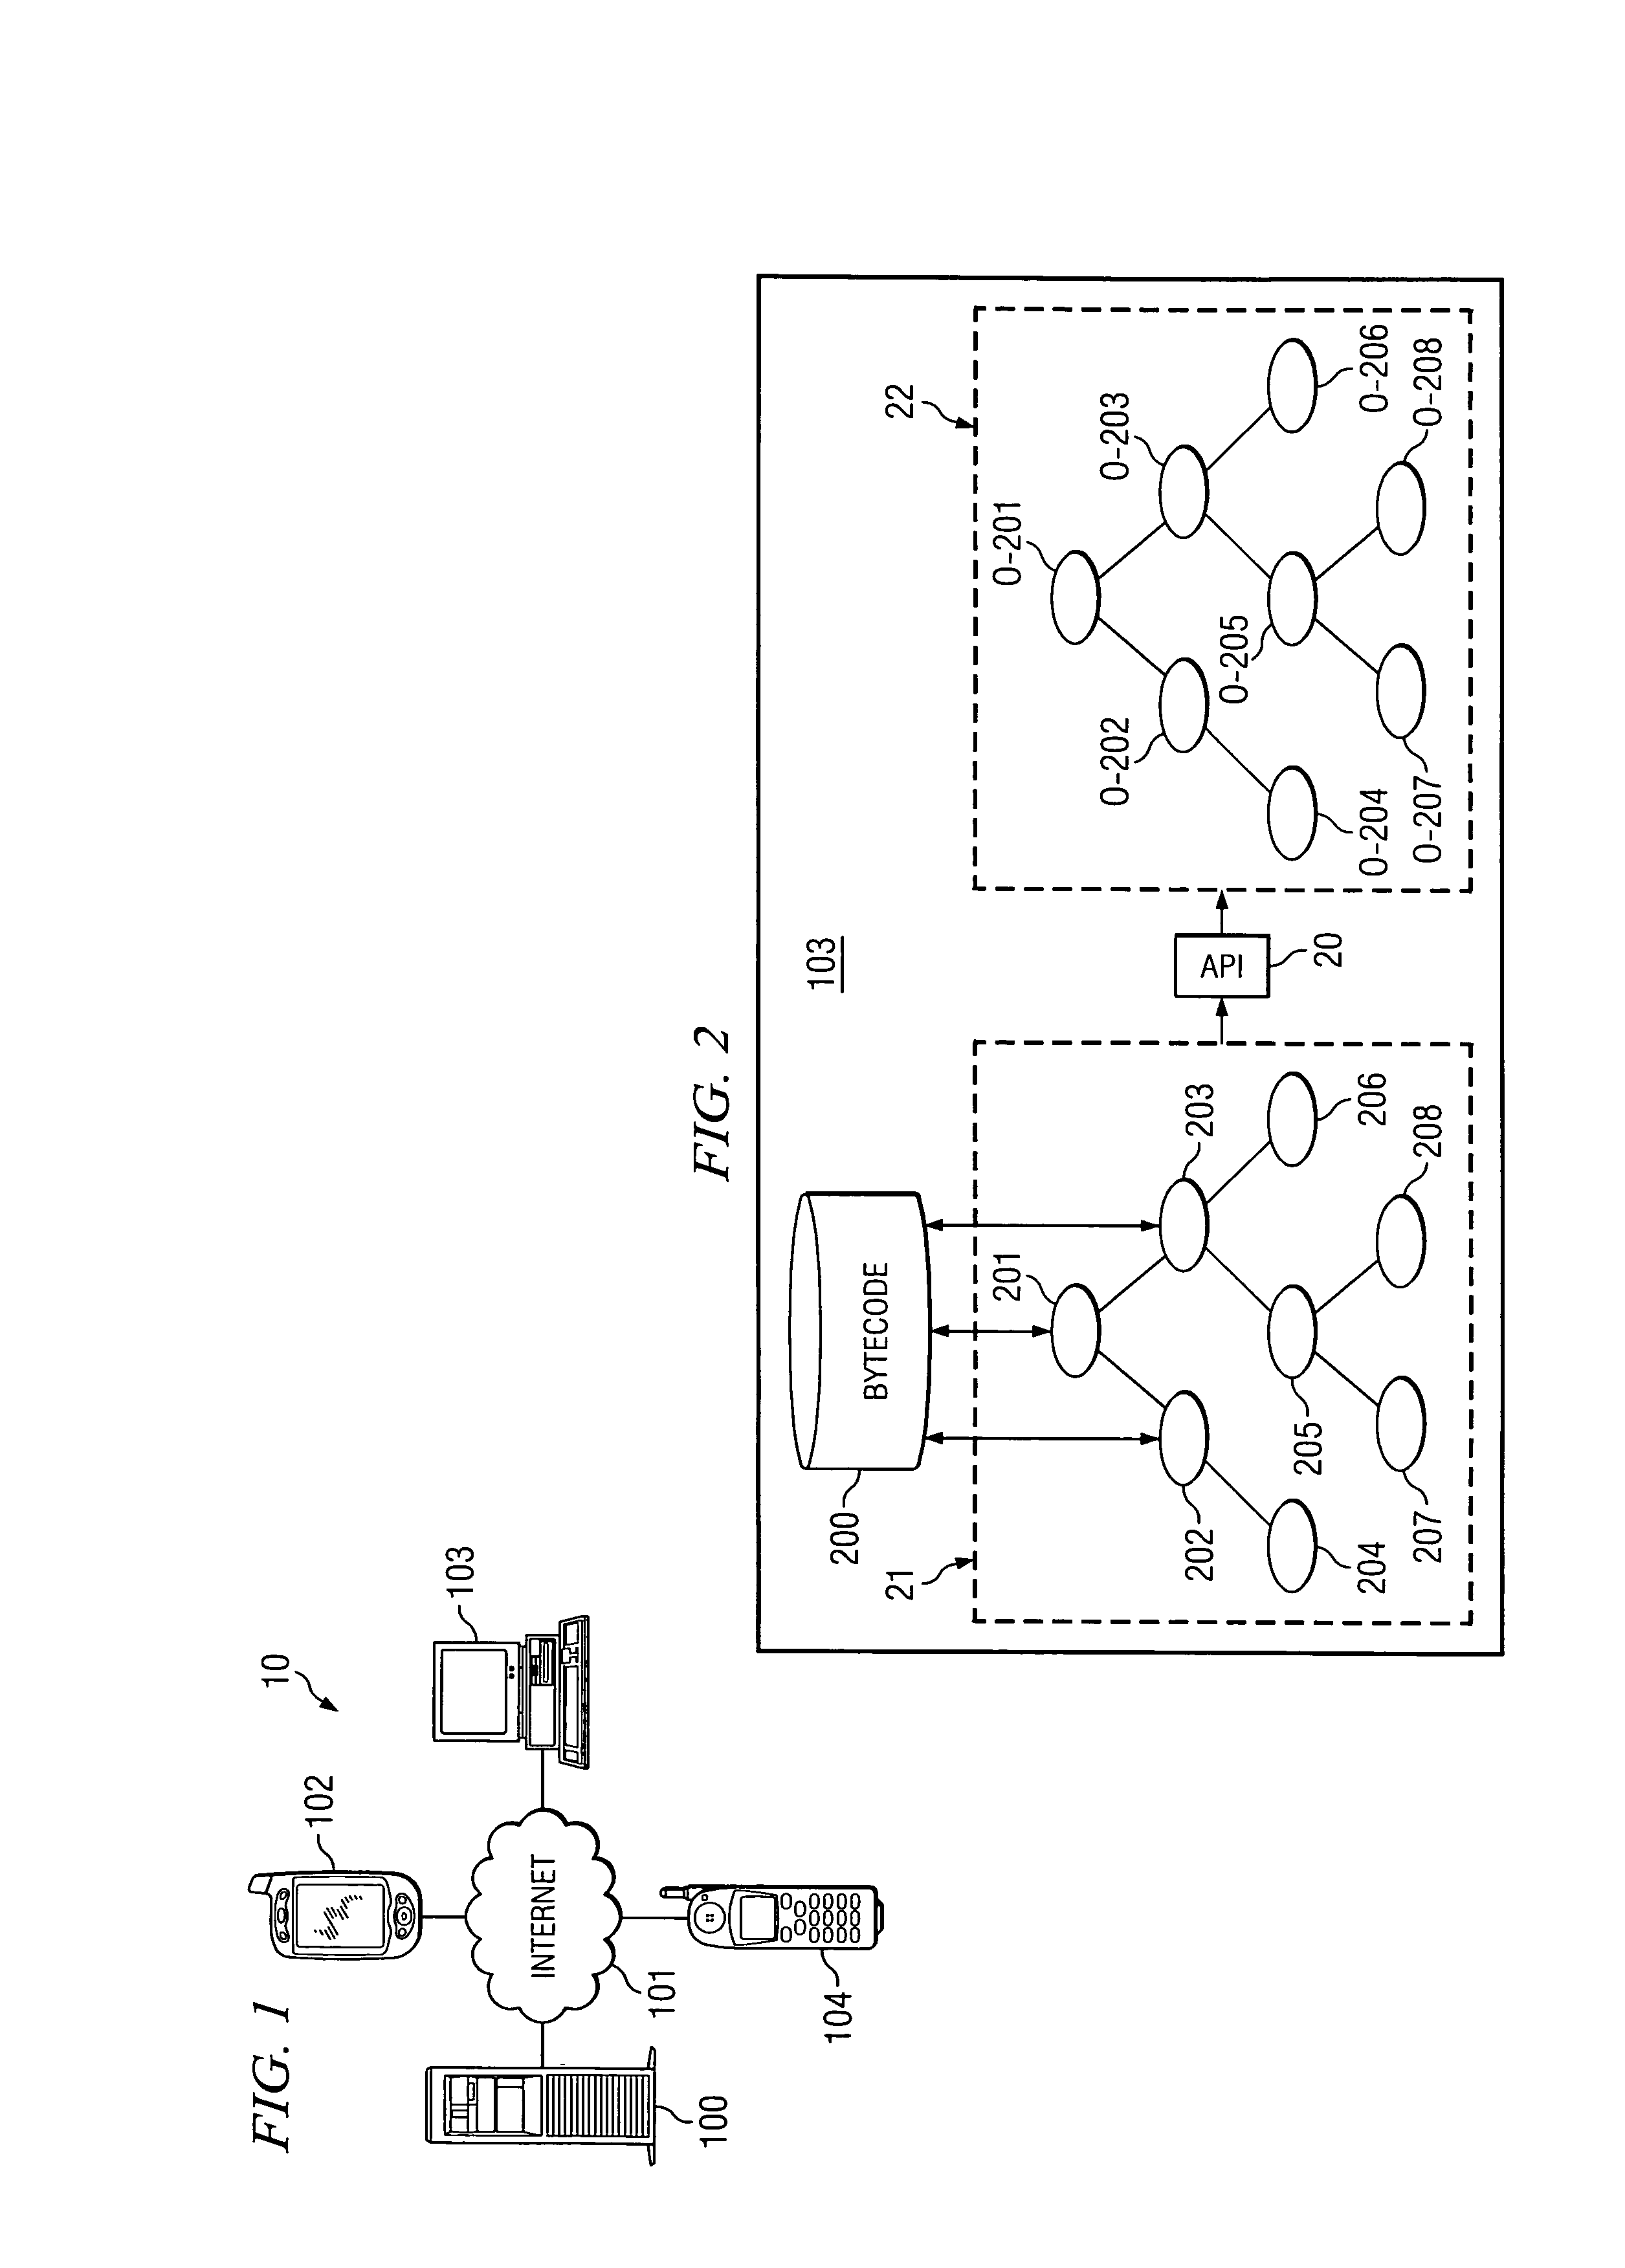 System and method for managing instantiation of interface elements in rich internet applications